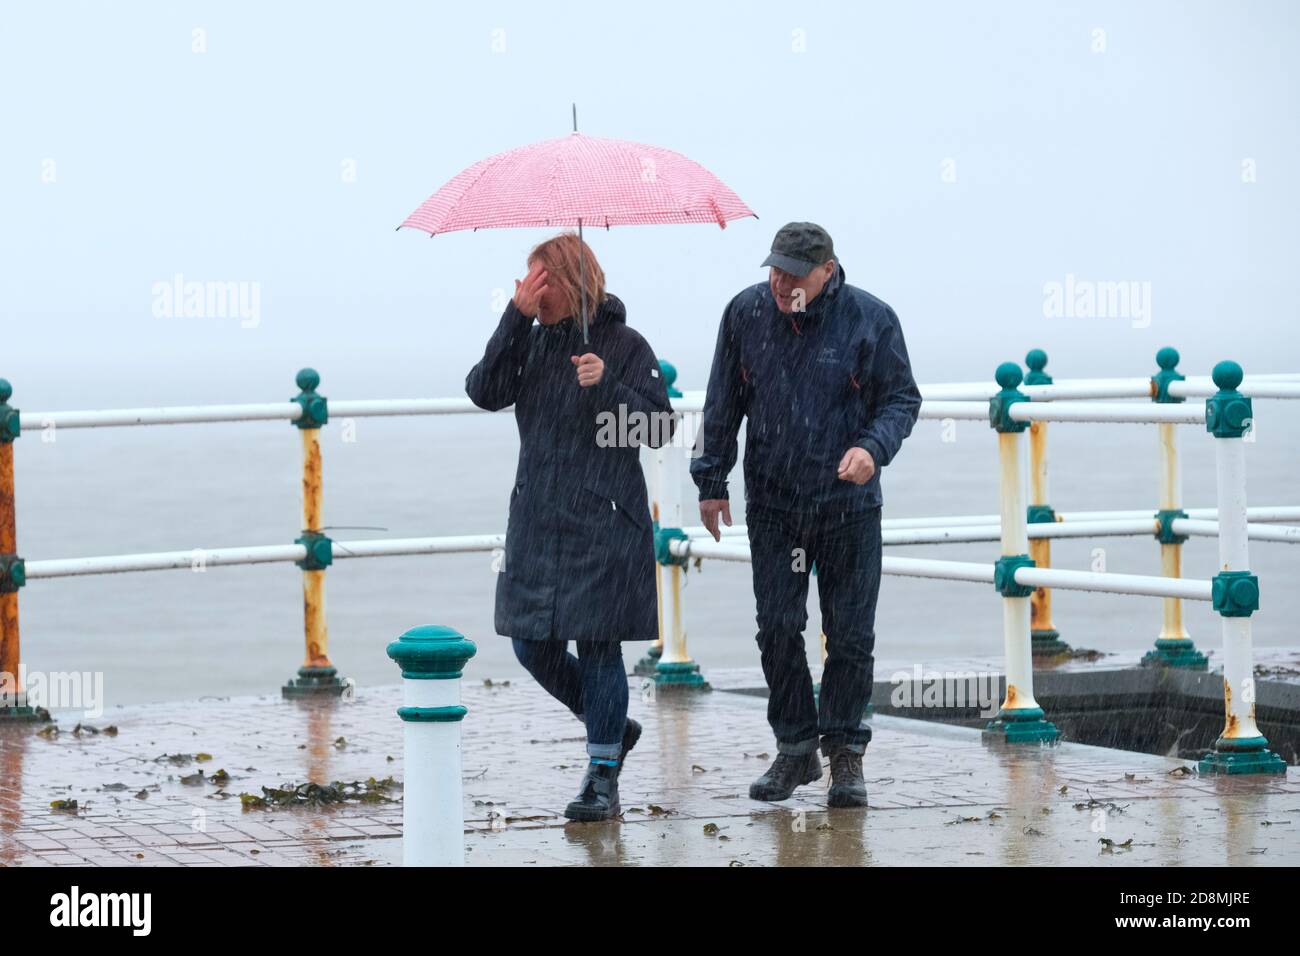 Stormy weather - Penarth, Wales UK. 31st October 2020.  The Met Office has issues a Yellow weather warning as storm Aiden batters the UK. Walkers brave the wind and rain on Penarth sea front. Stock Photo